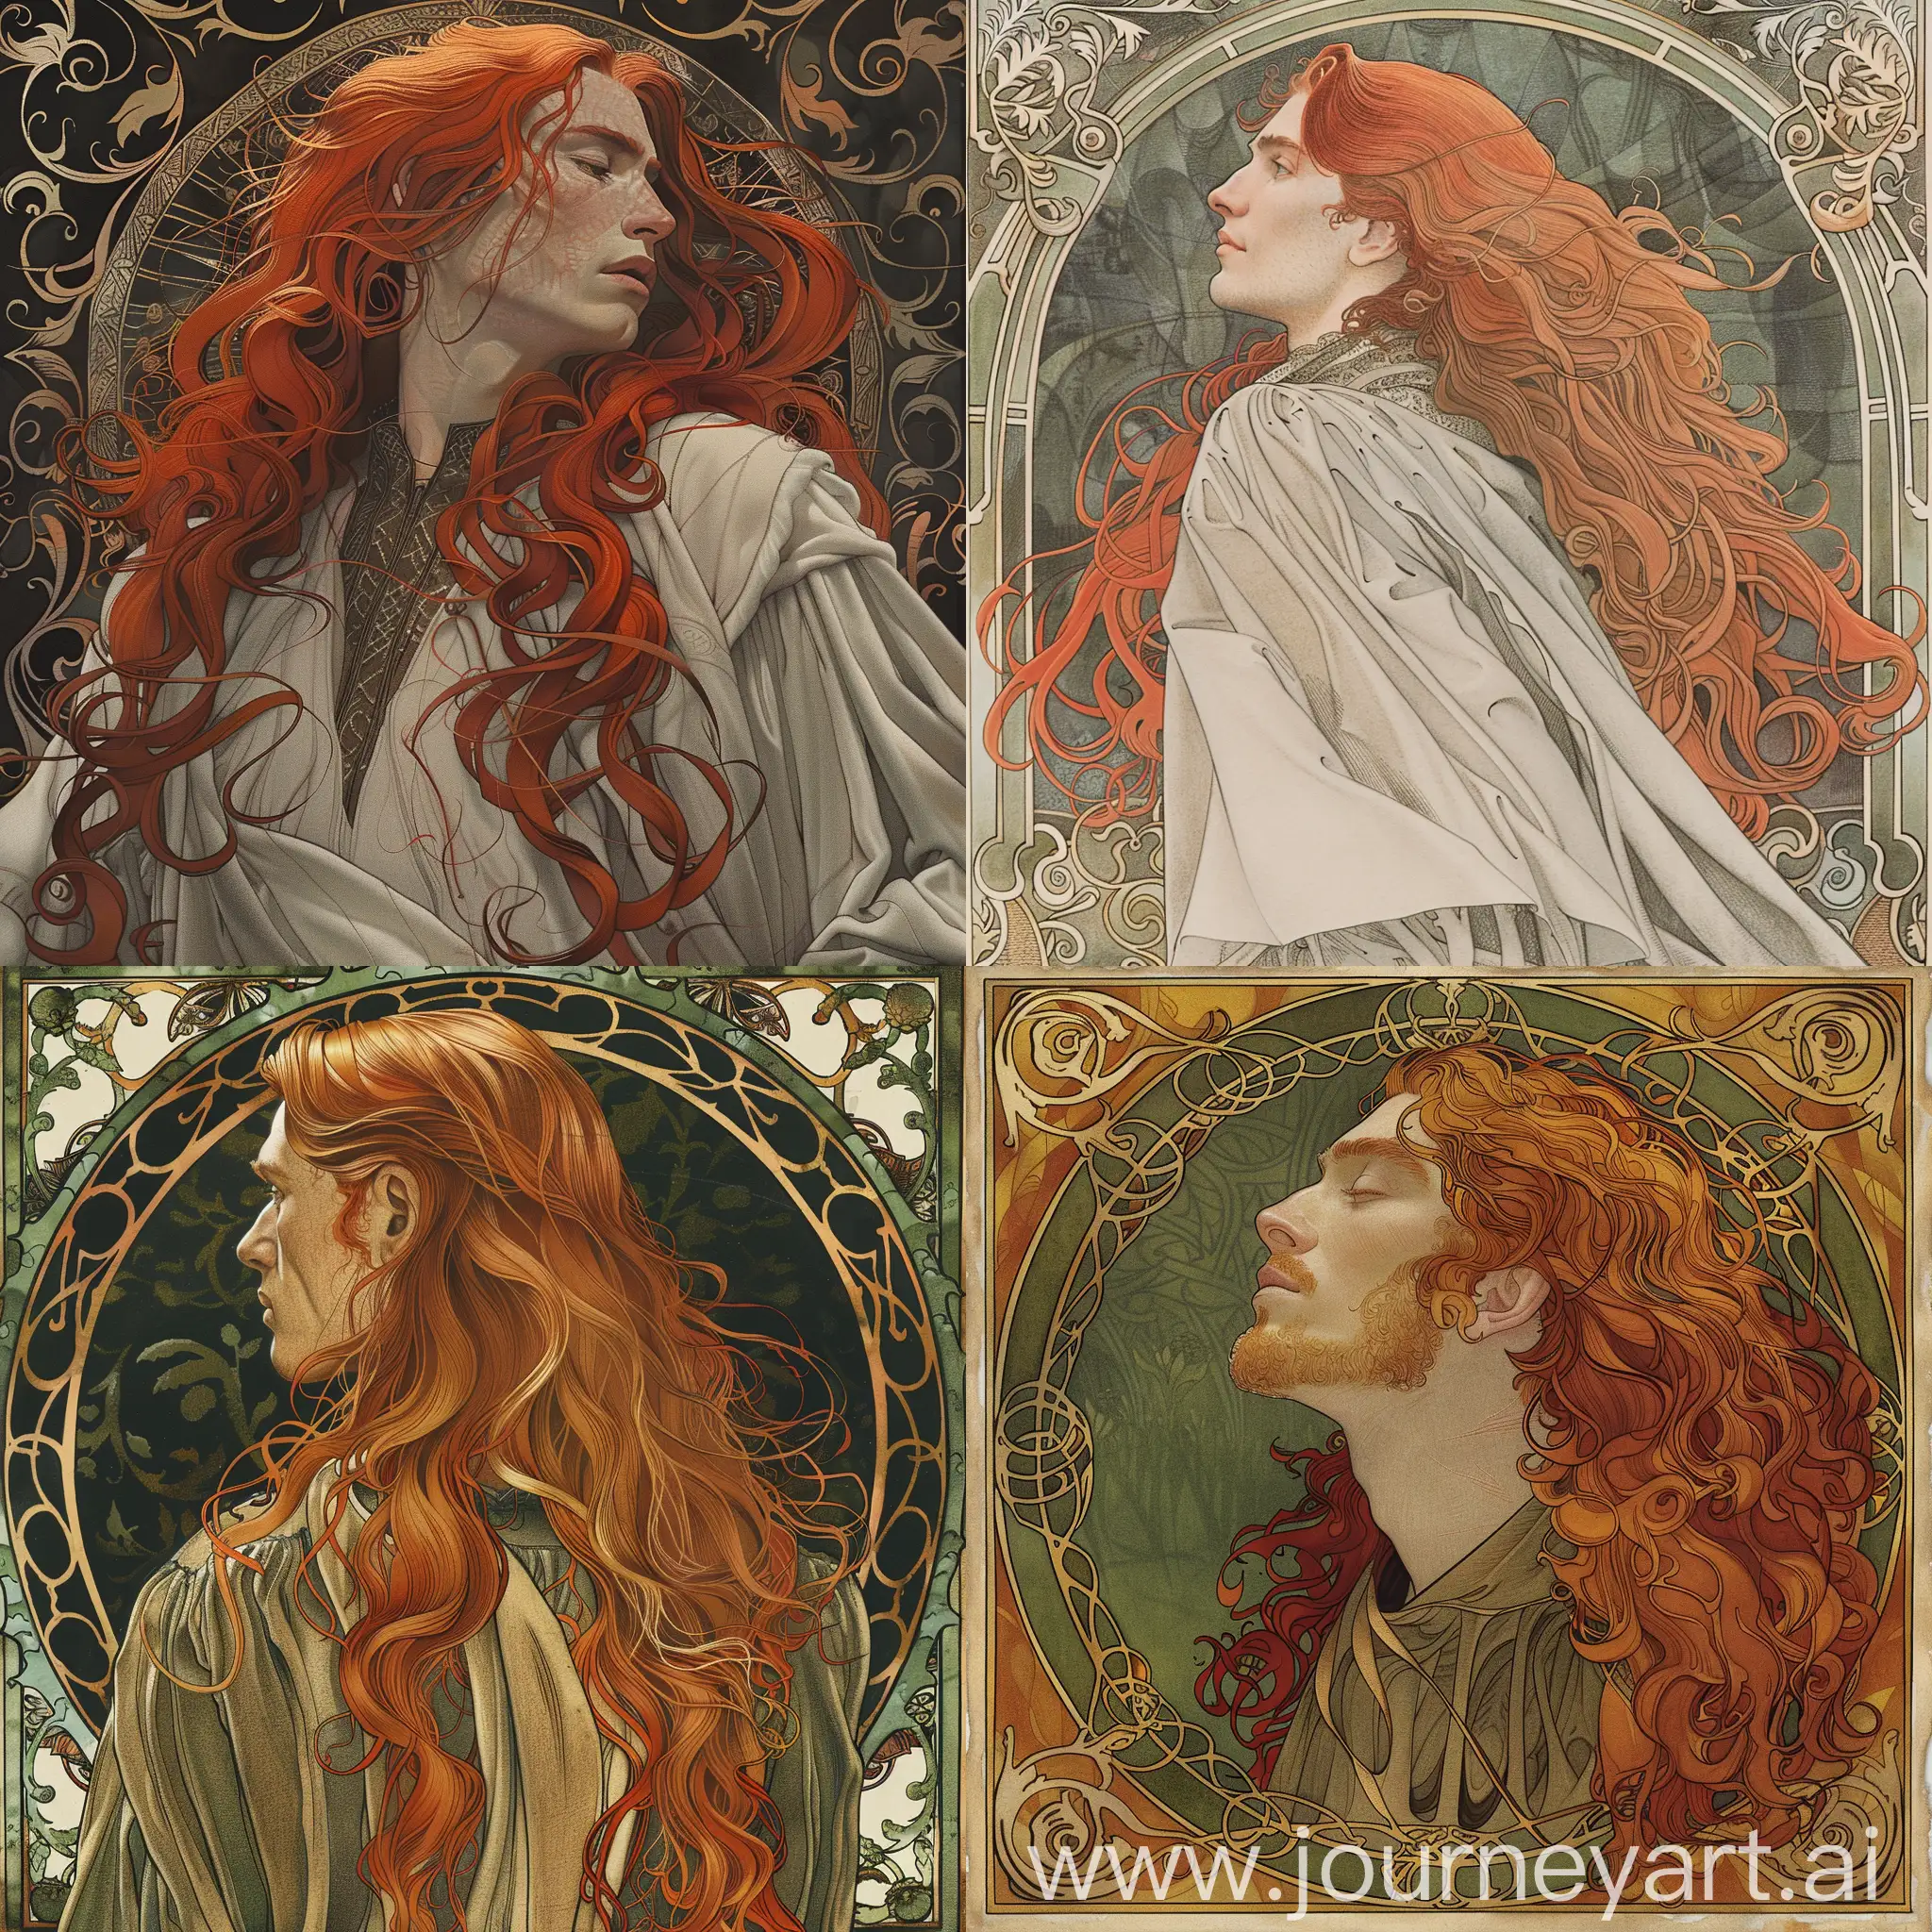 Man with long red hair, in the mantle, art nouveau, illustration